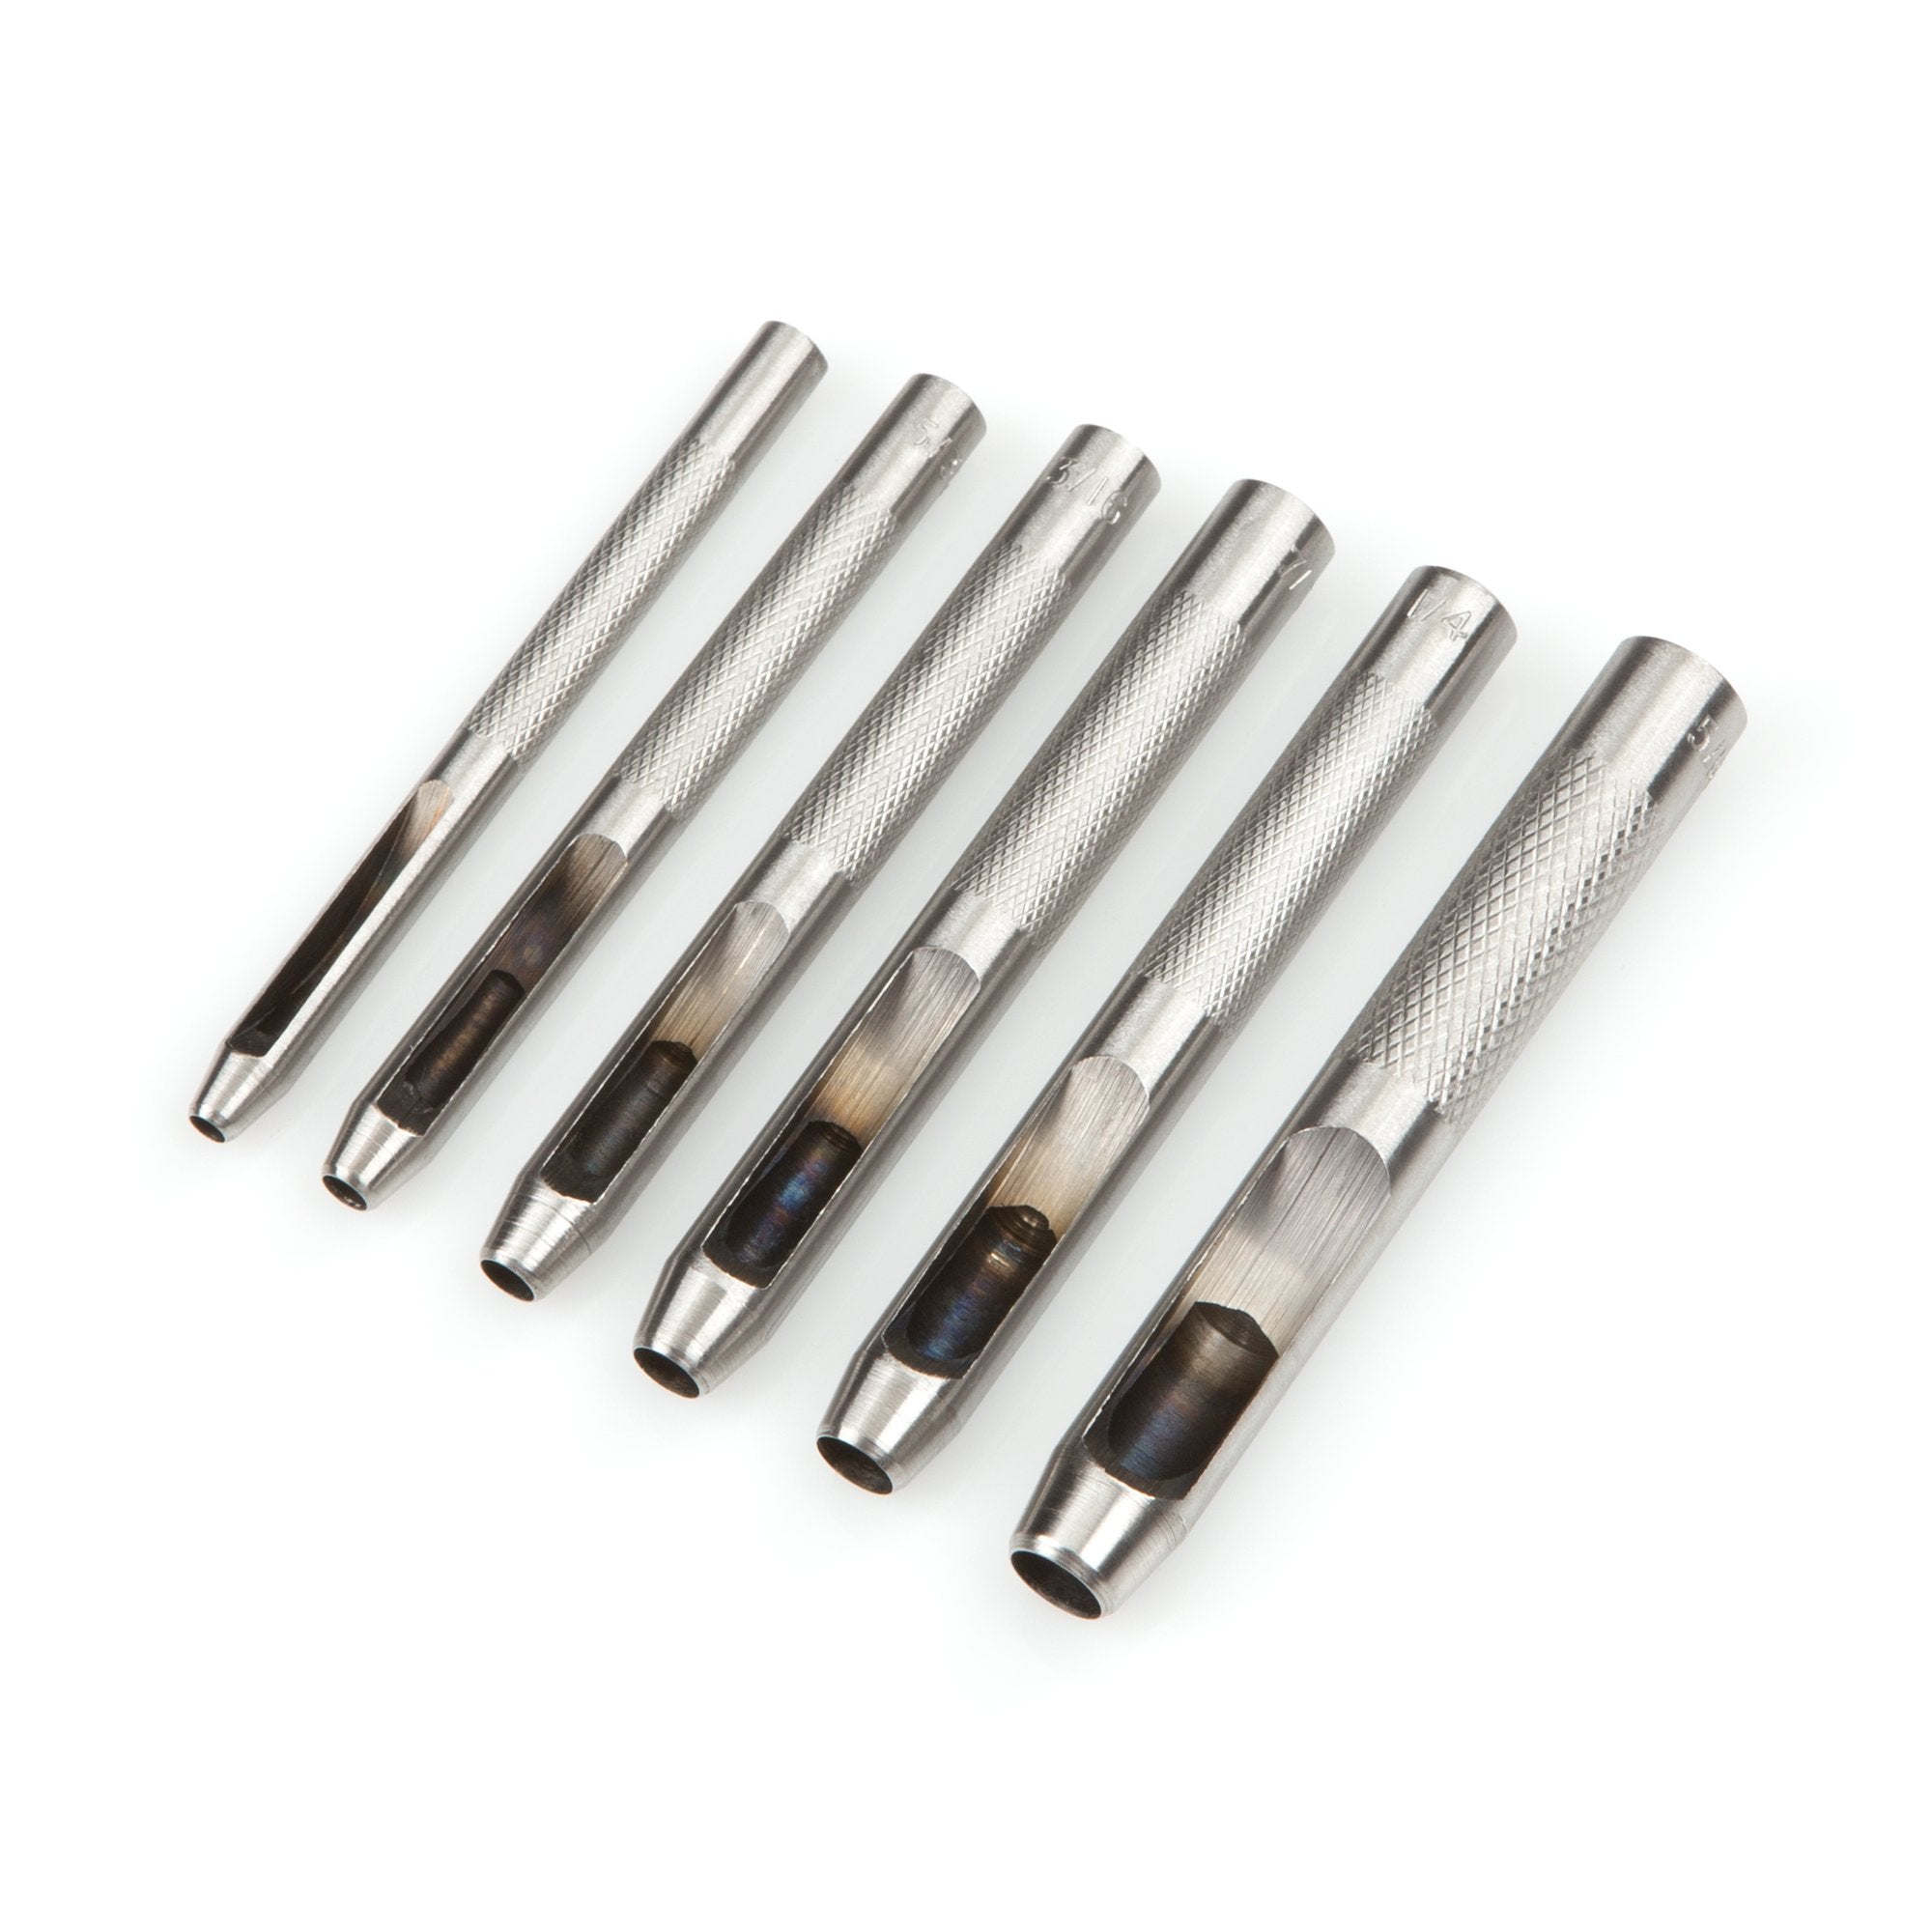 Hollow Round Hole Punch/ Drive Punch Set (11 pieces)